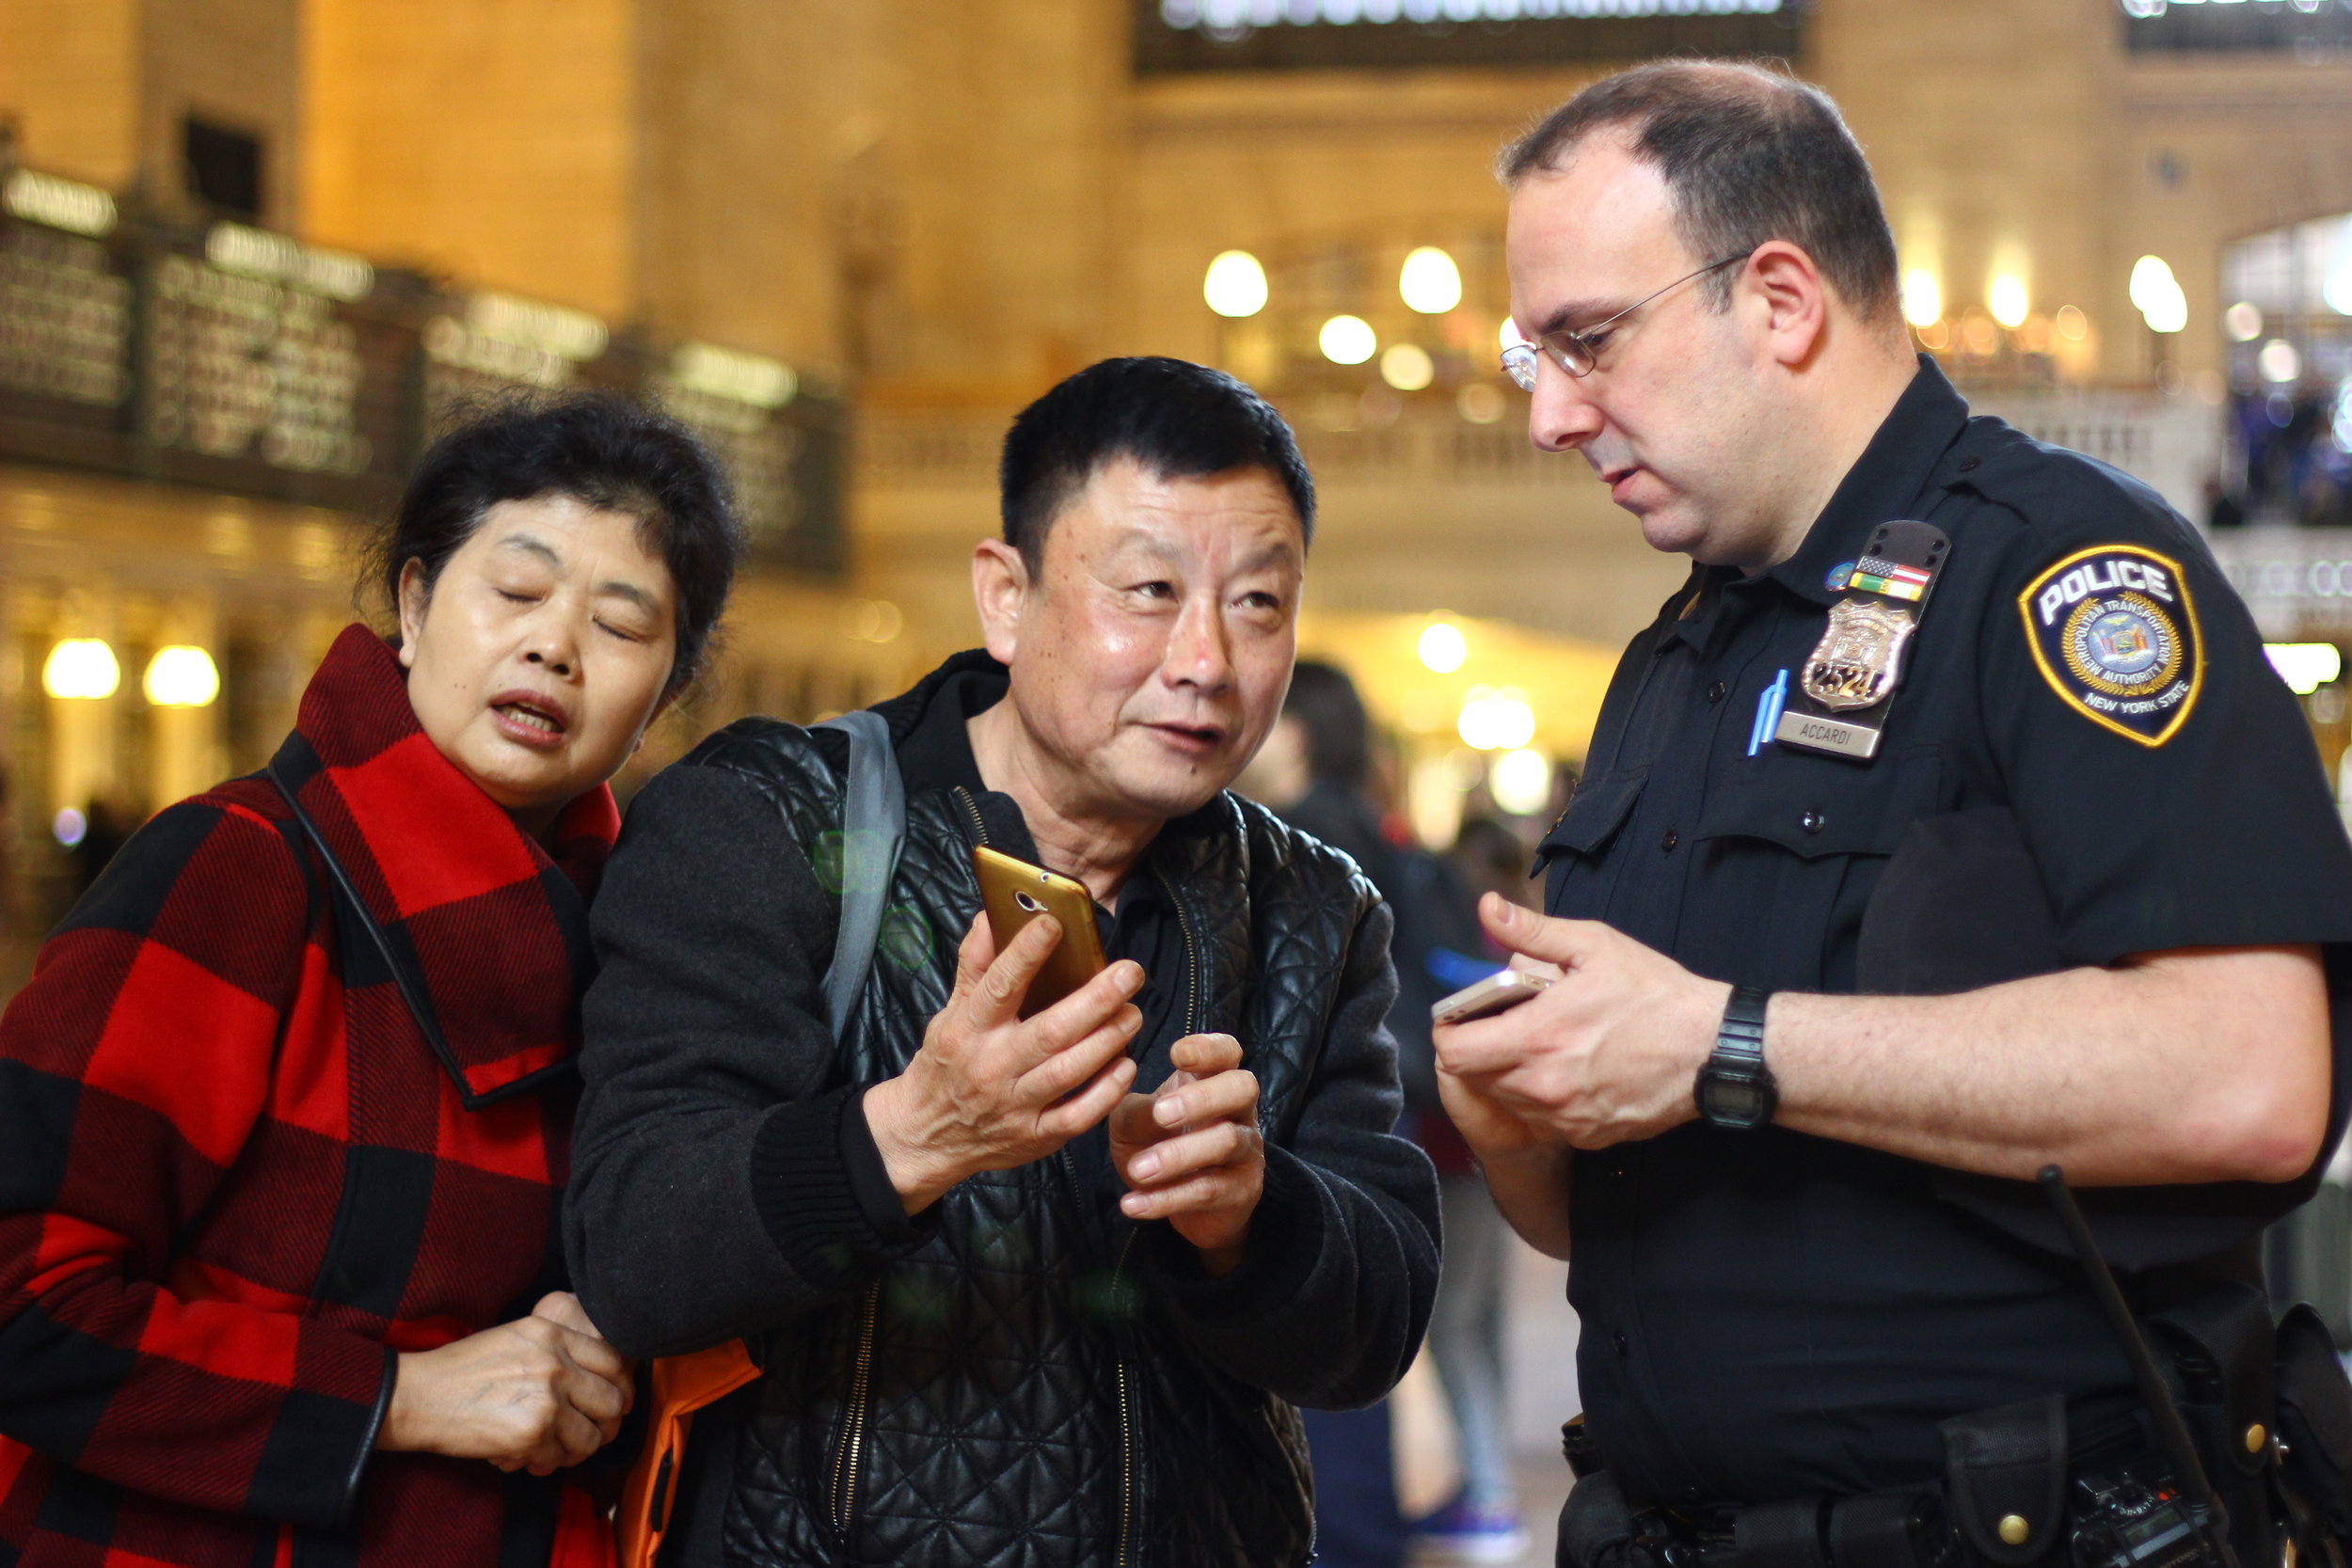 Grand central tourists